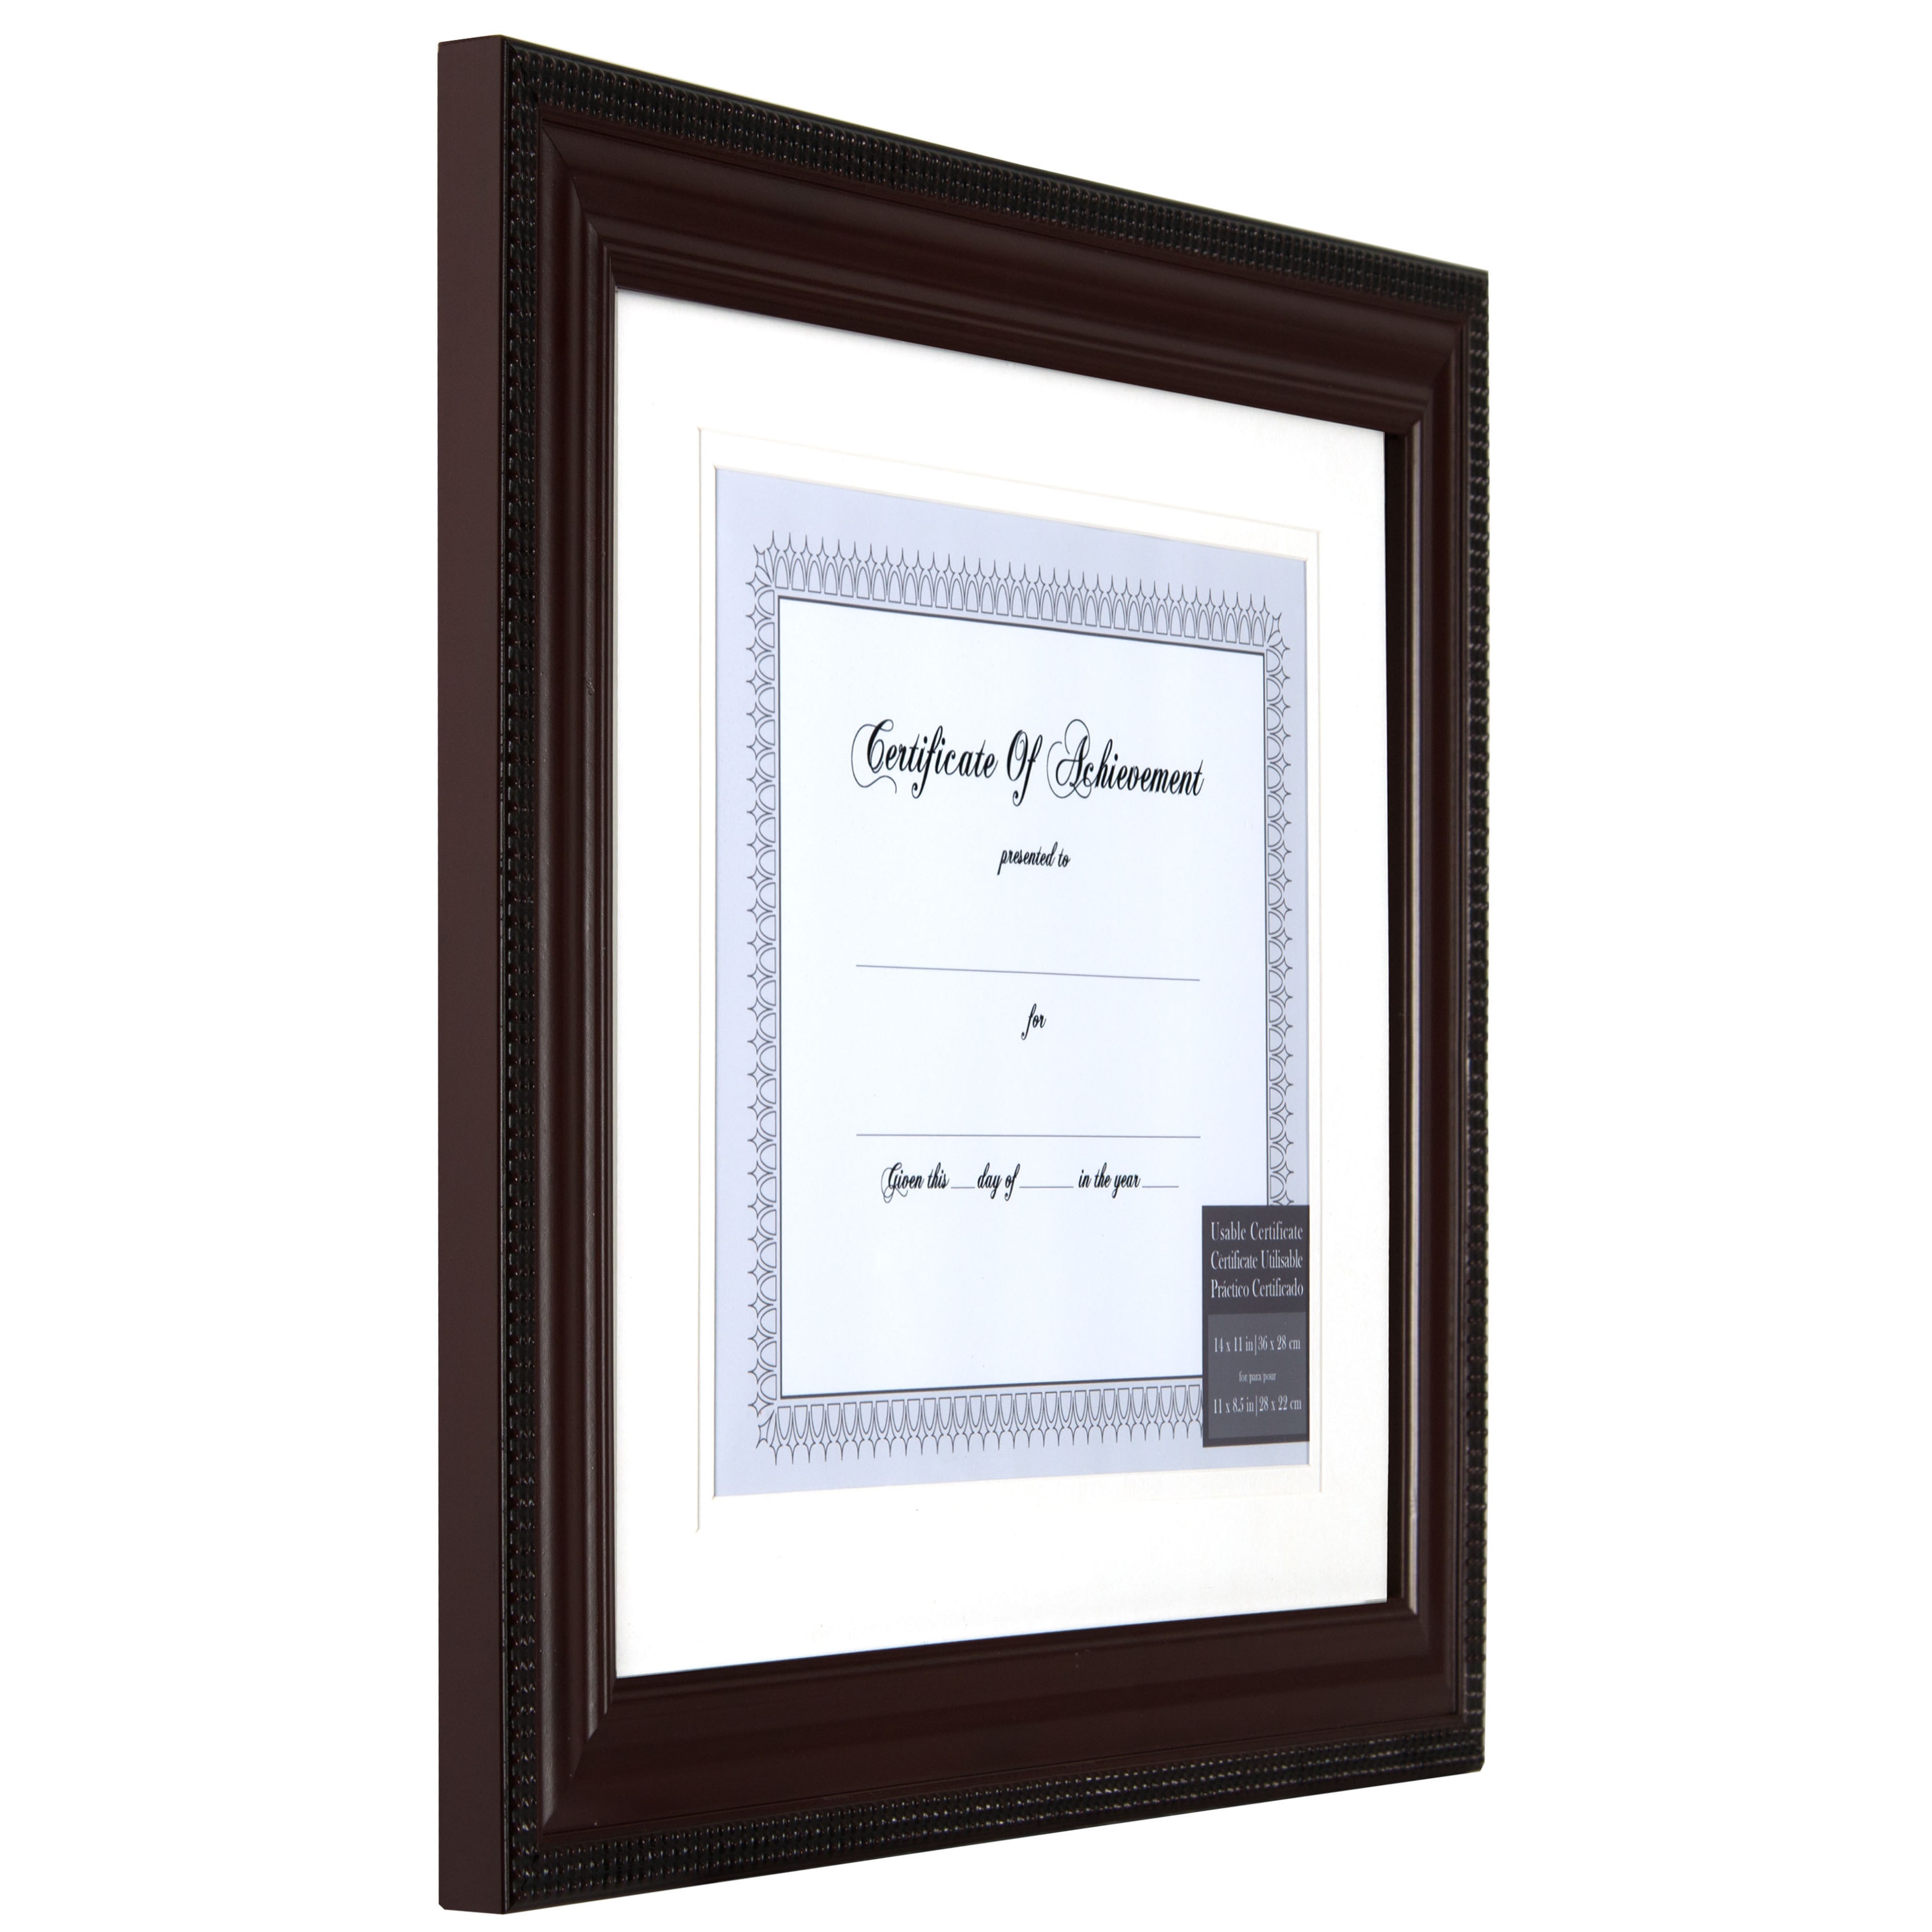 Nielsen Bainbridge Gallery Solutions with Bead Document Wall Picture Frame - Mahogany - image 2 of 3